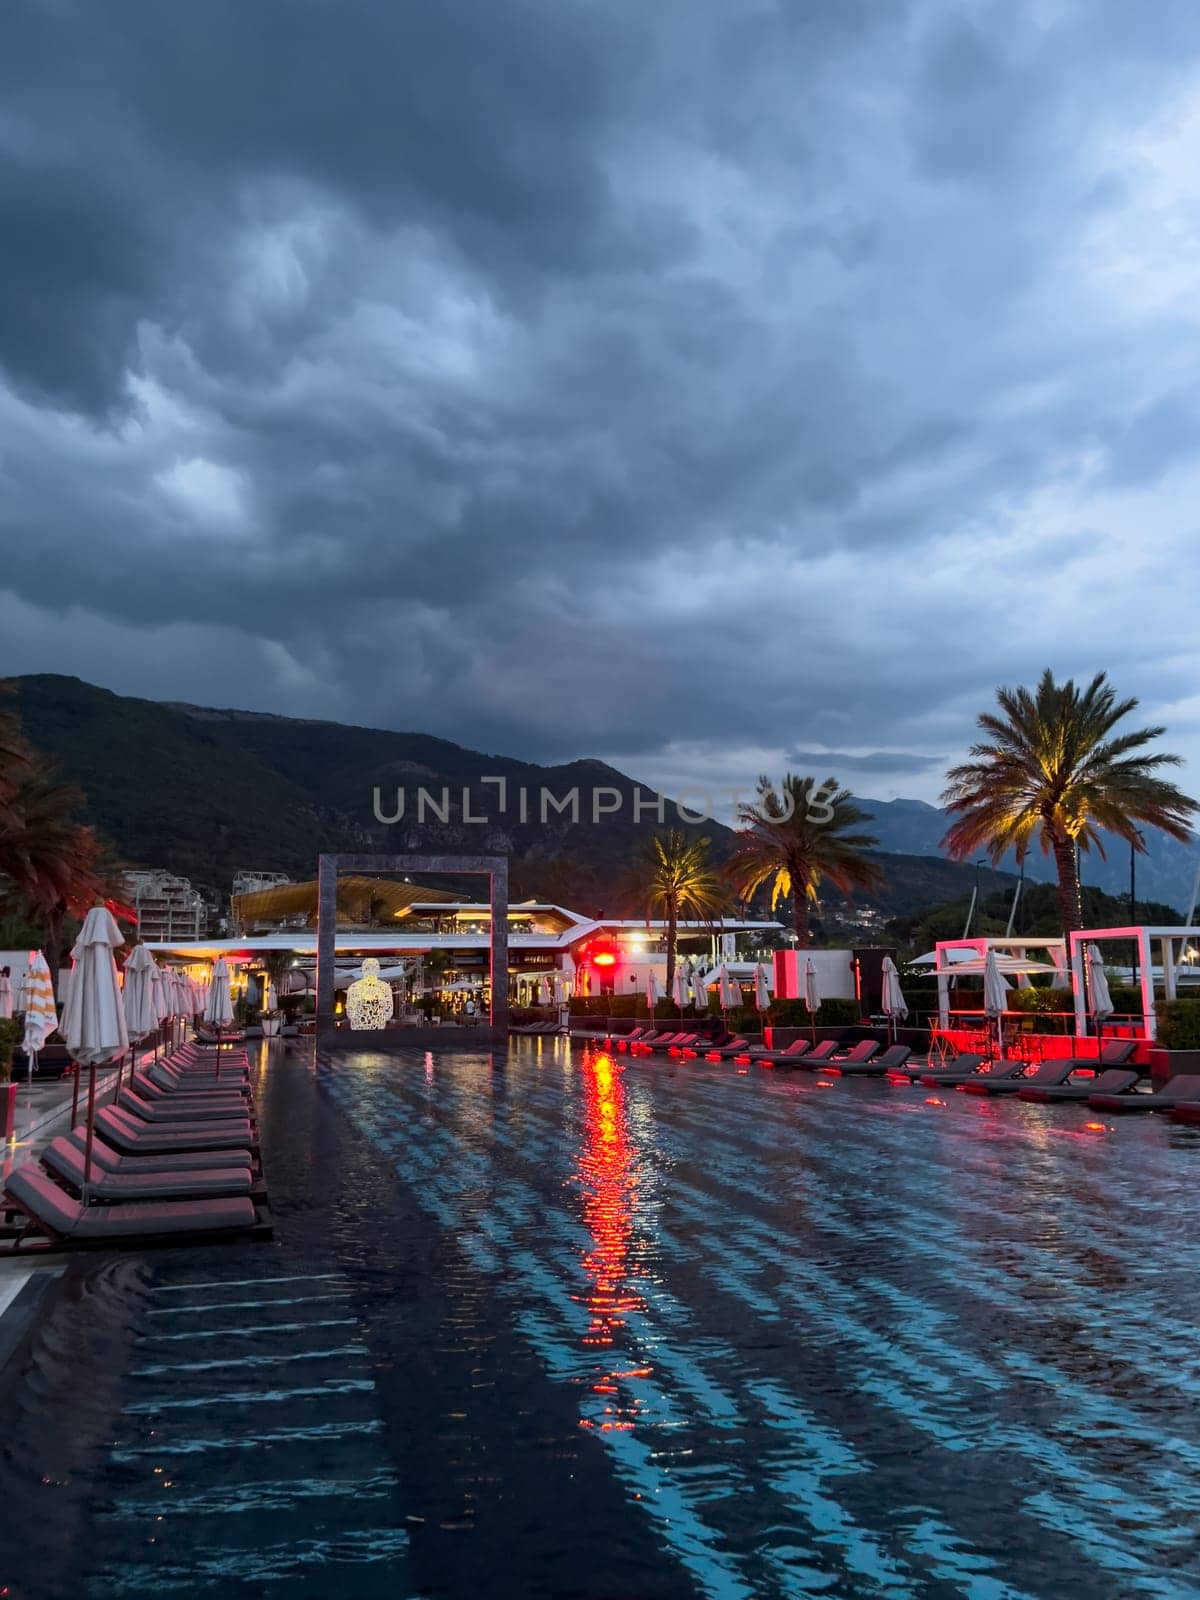 Sun loungers with folded umbrellas stand near the illuminated pool at dusk. High quality photo